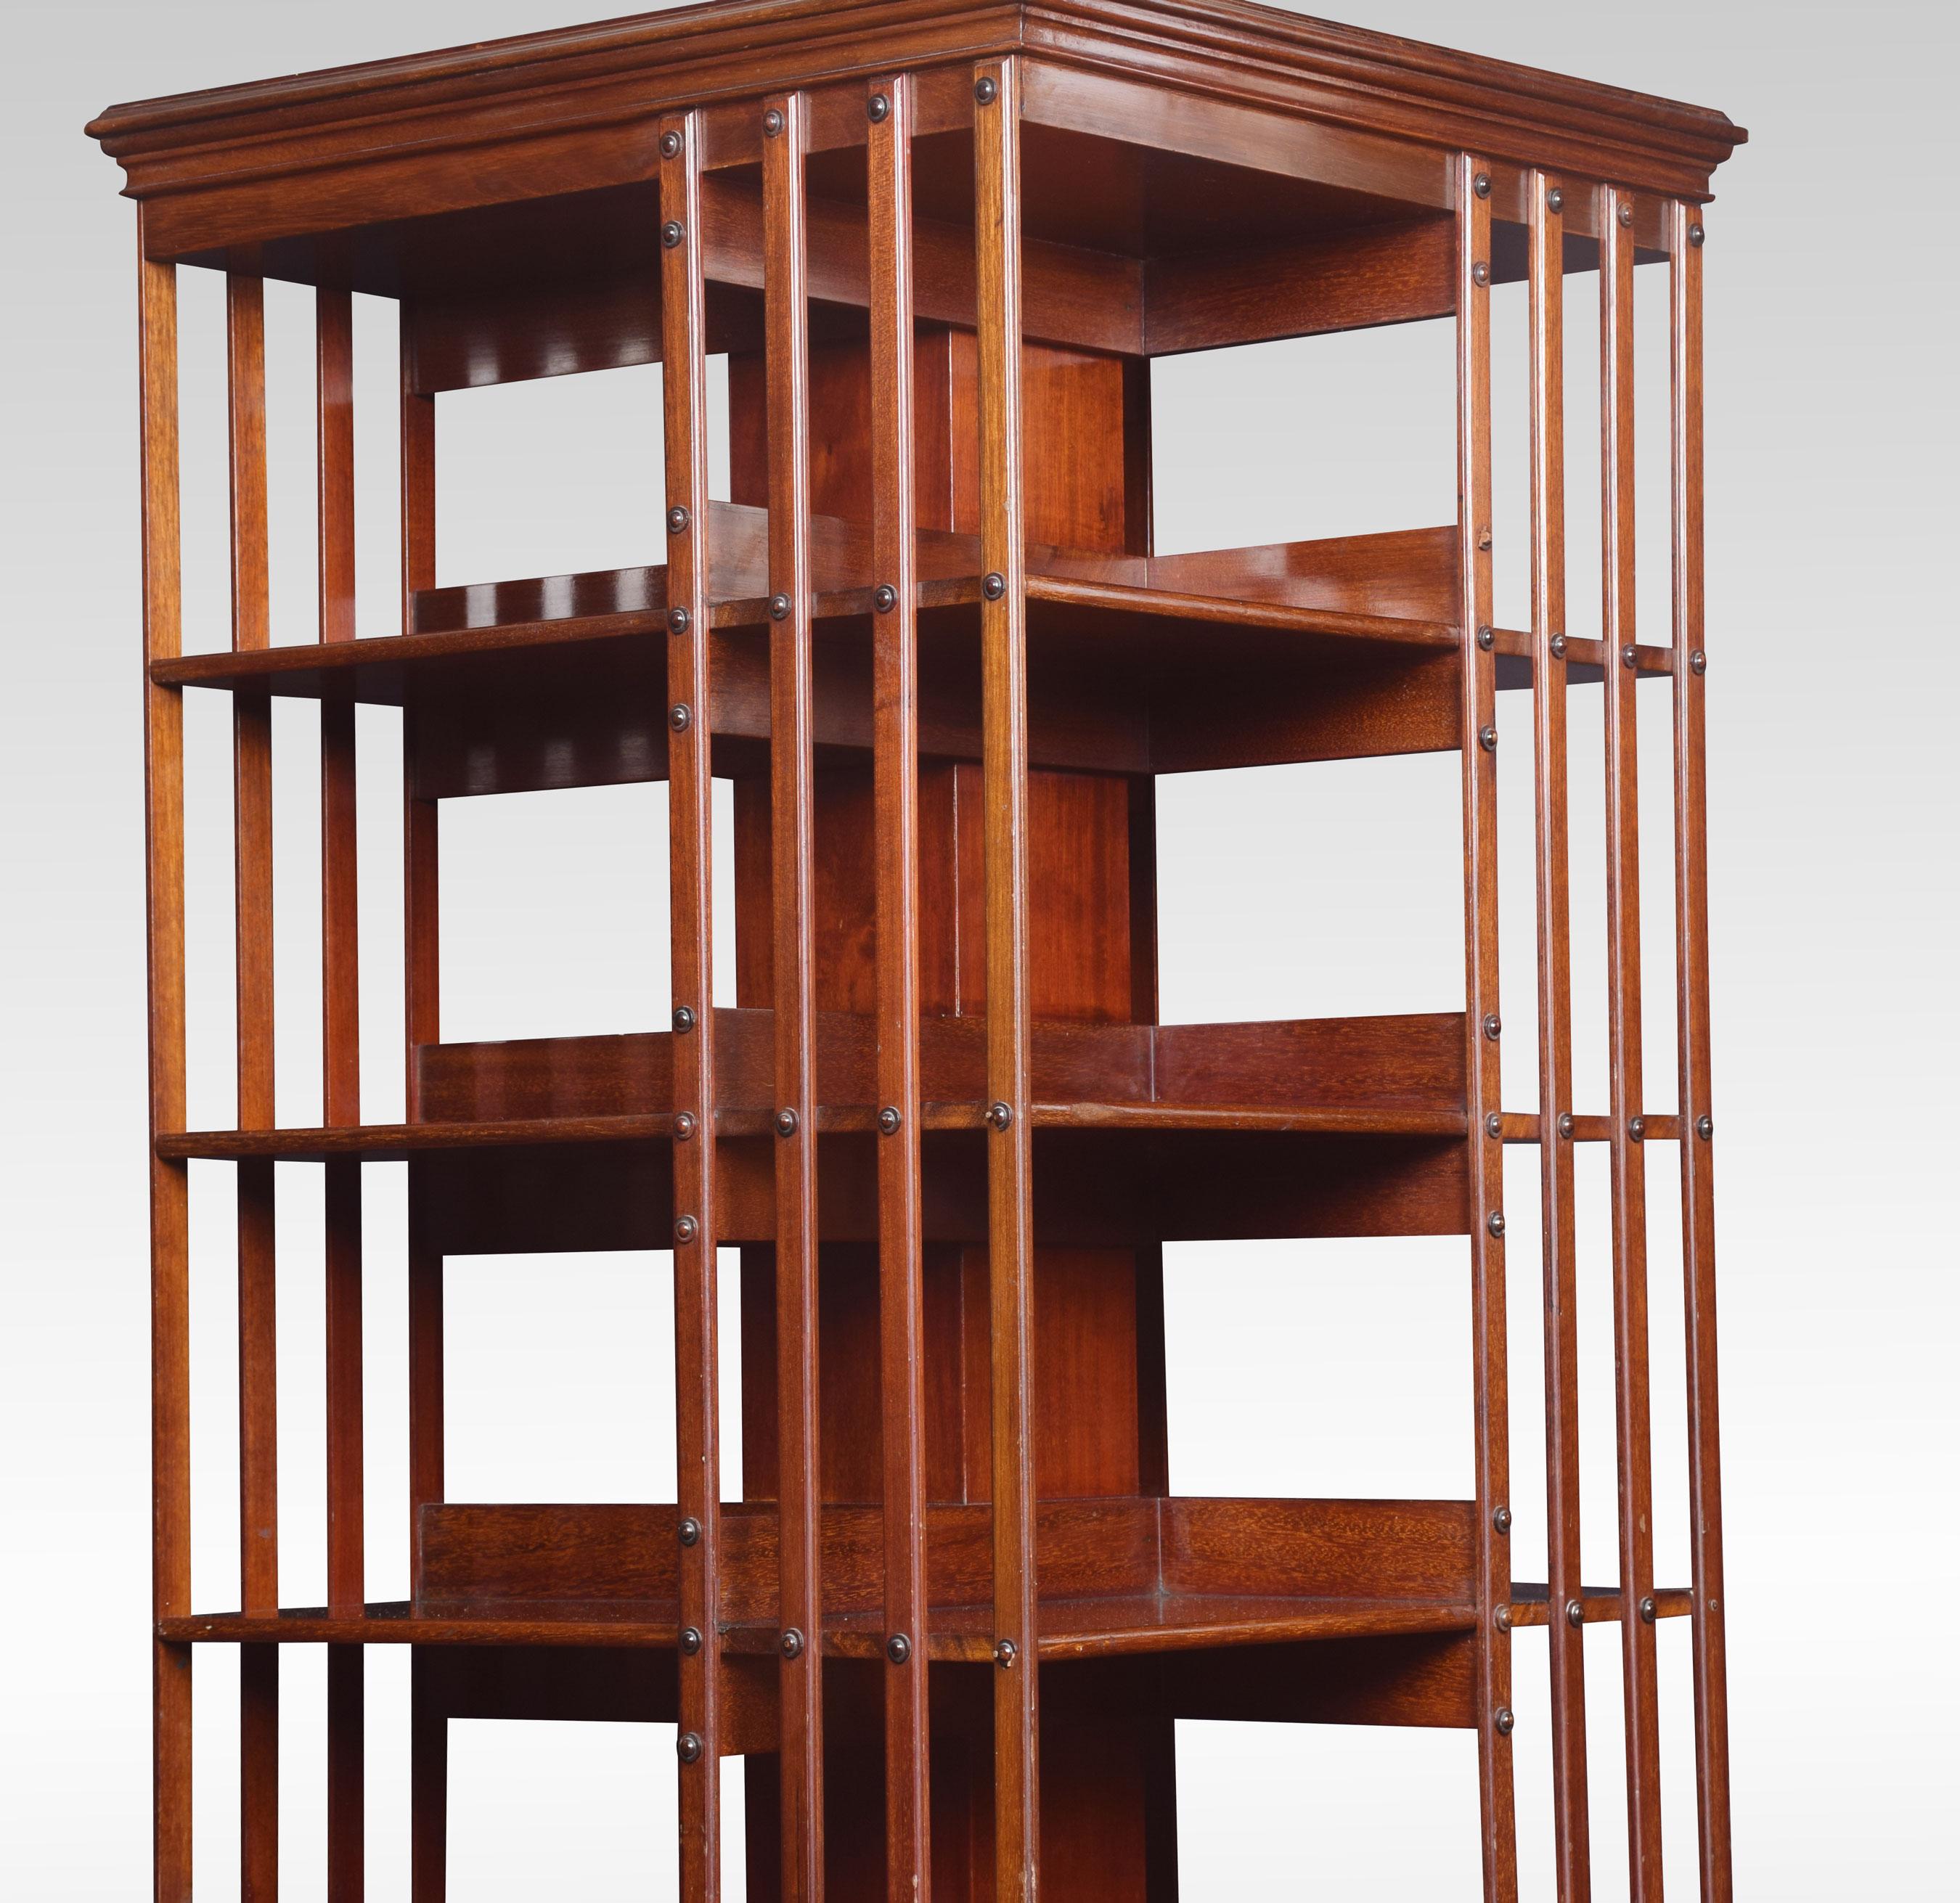 Very large mahogany revolving bookcase the square molded top above five tiers with an arrangement of shelves raised up on cruciform base terminating in ceramic castors.
Dimensions:
Height 66 inches
Width 24 inches
Depth 24 inches.